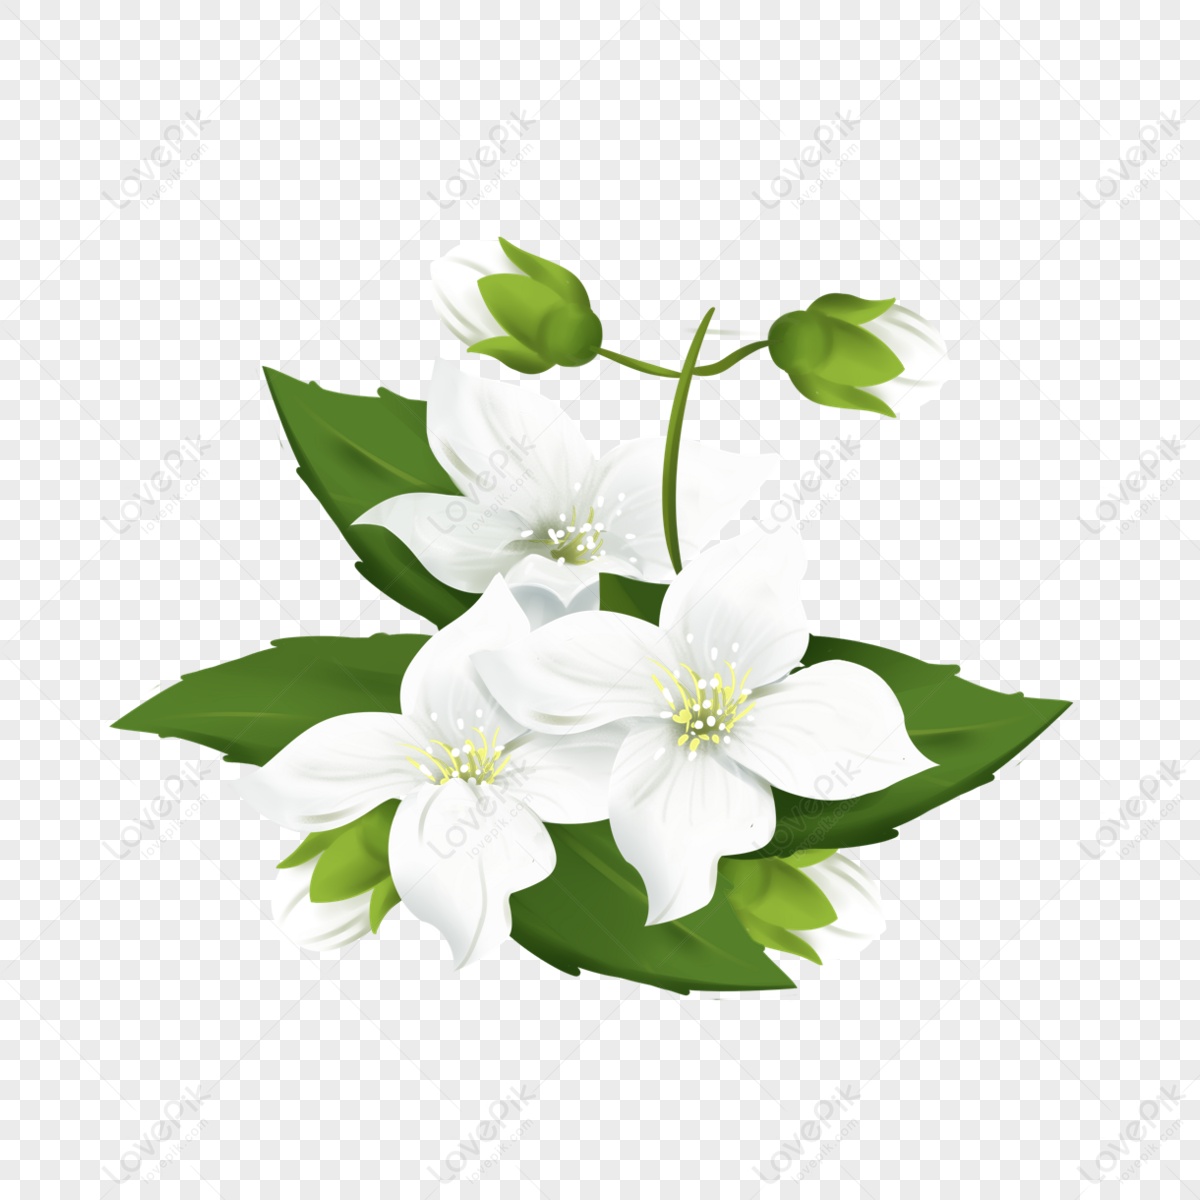 Clip art cartoon flower hi-res stock photography and images - Page 6 - Alamy